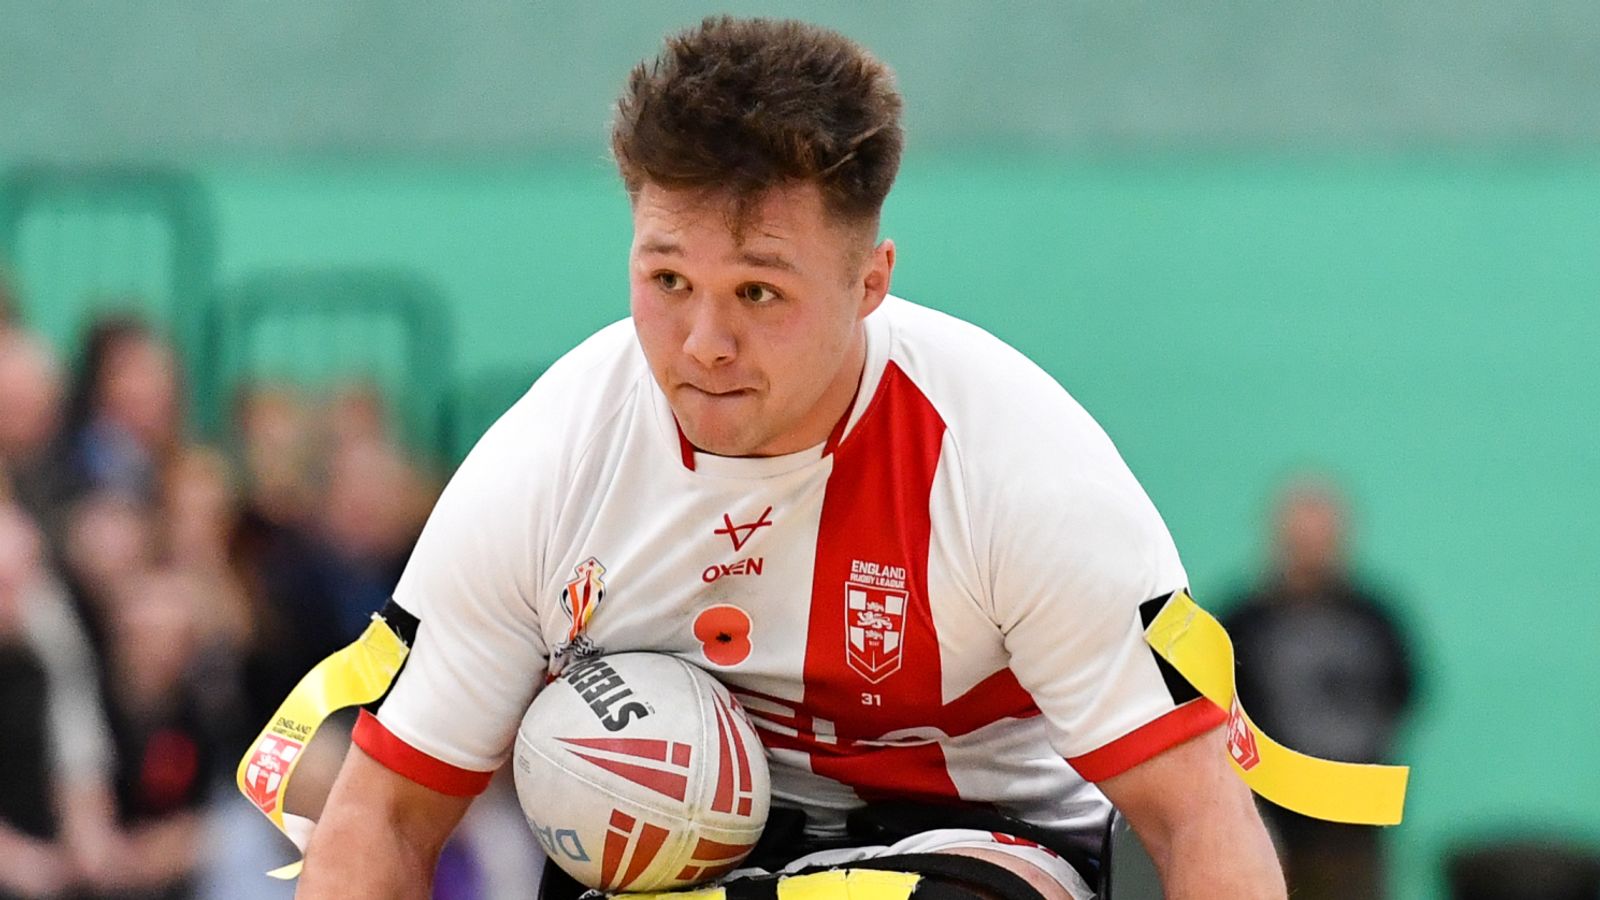 Wheelchair Rugby League: England captain Tom Halliwell targeting Grand Final and World Cup glory